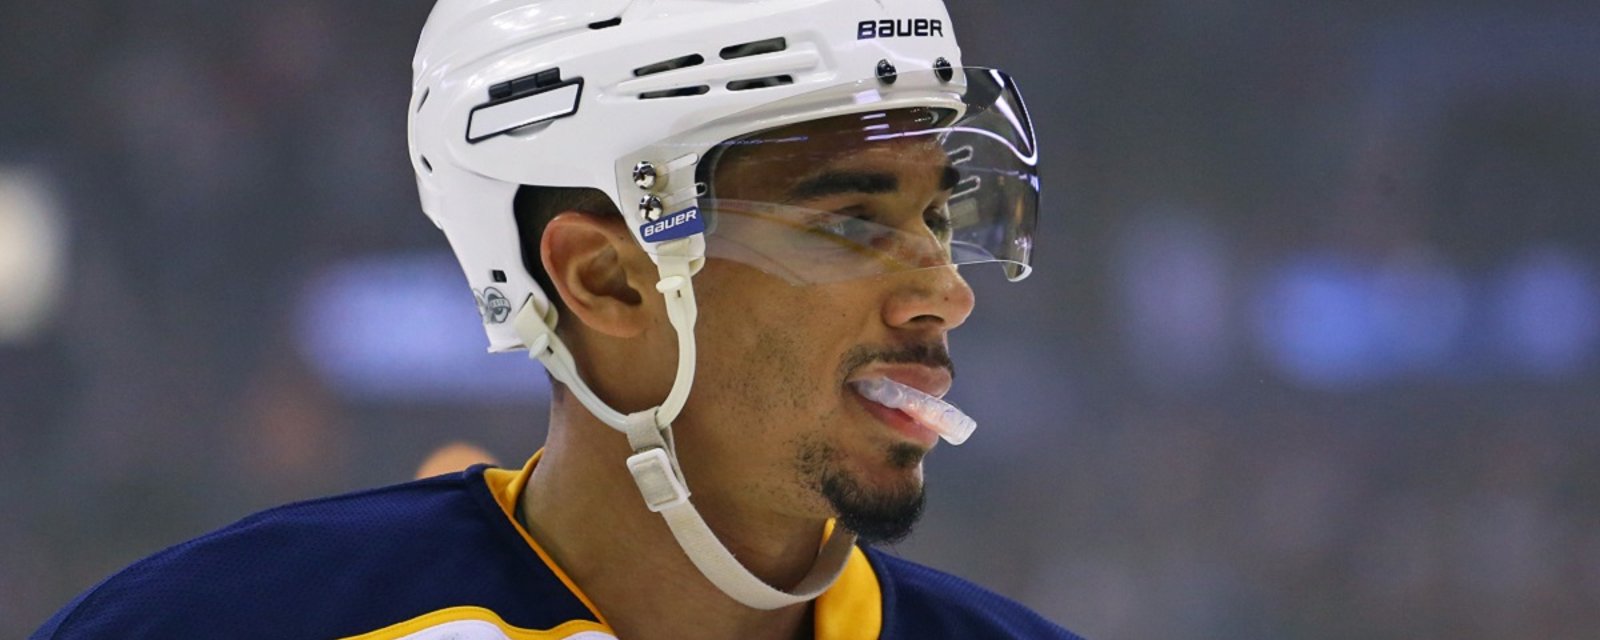 New Sabres GM expected to make tough decision on Evander Kane in coming days.